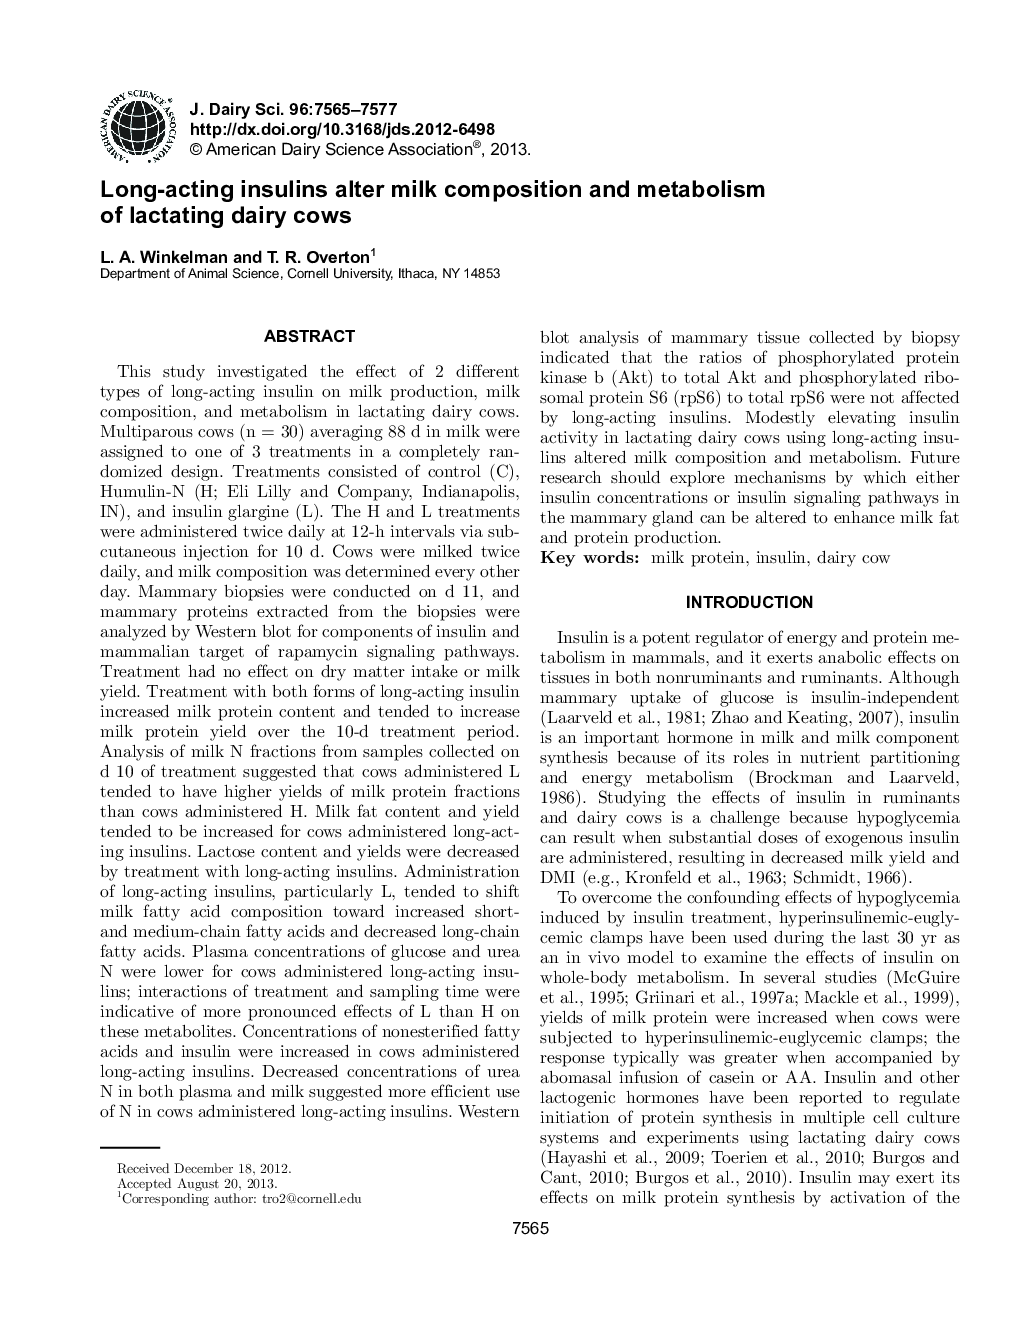 Long-acting insulins alter milk composition and metabolism of lactating dairy cows